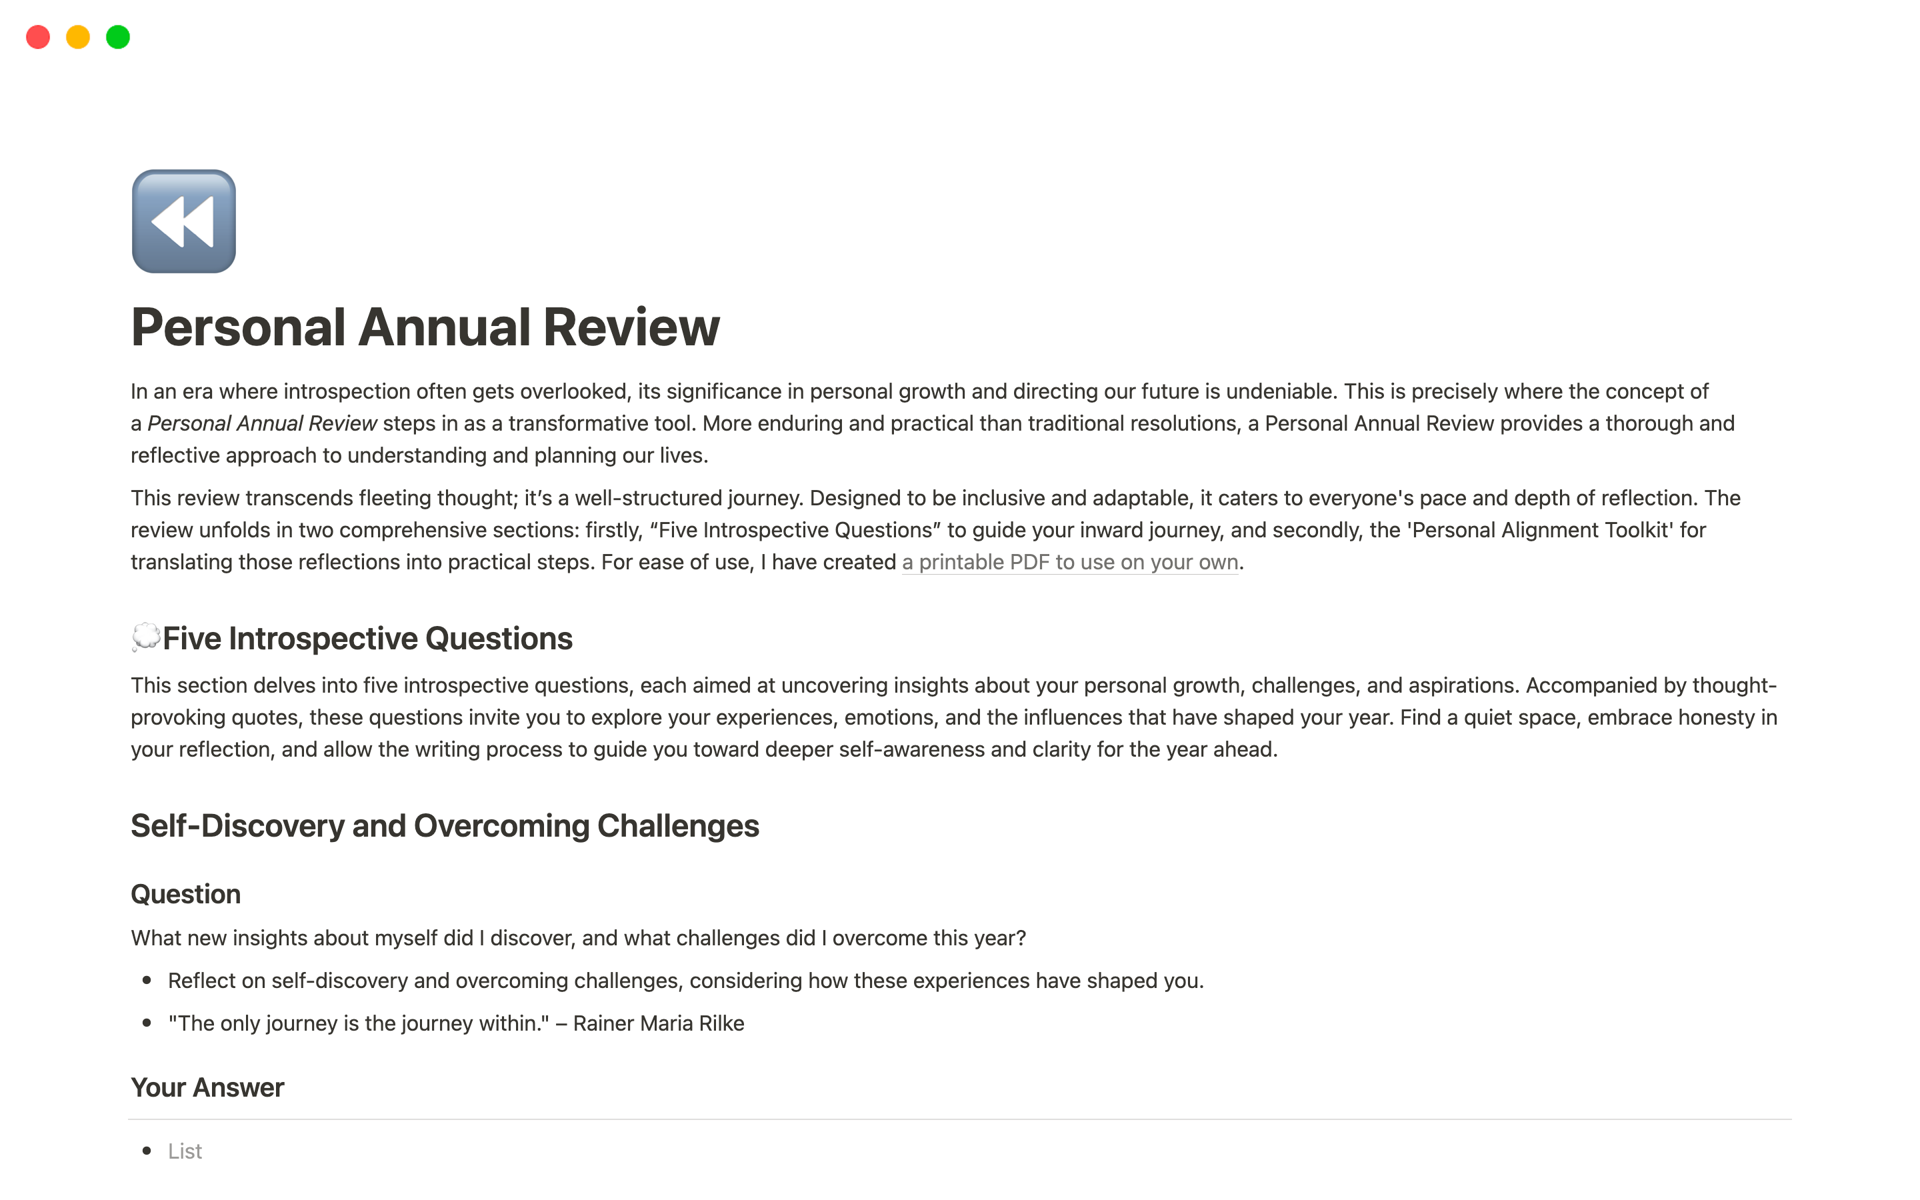 The Personal Annual Review is a comprehensive self-improvement tool that combines introspective questions with actionable strategies, guiding individuals in aligning their actions with their values to foster a more focused and fulfilling future.